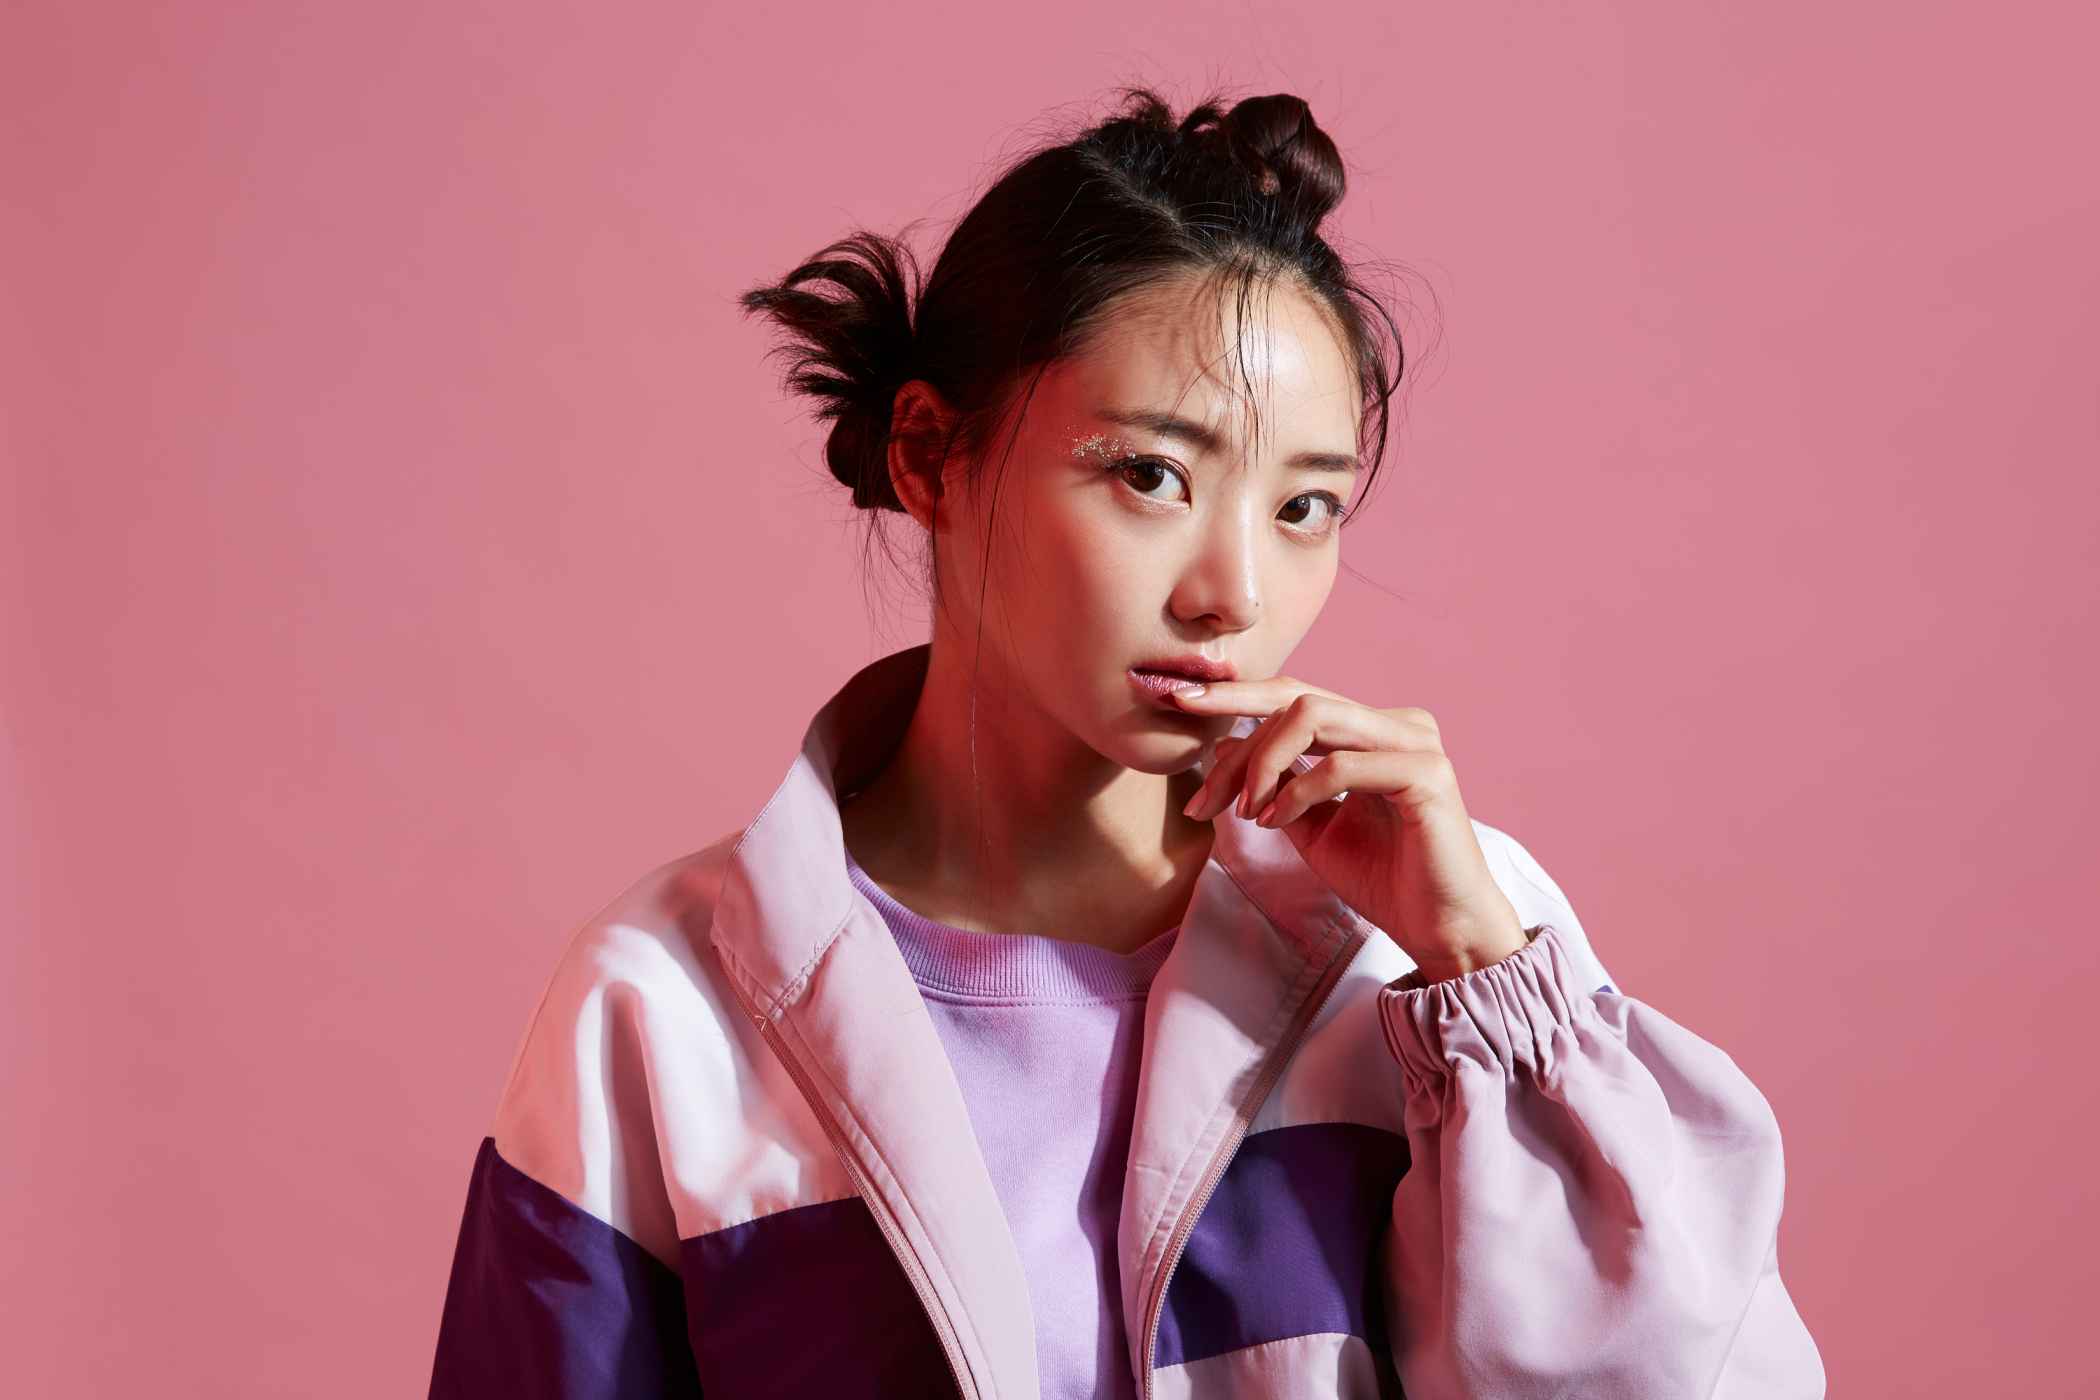 Luxury Fashion's Fascination With Korean Pop Culture